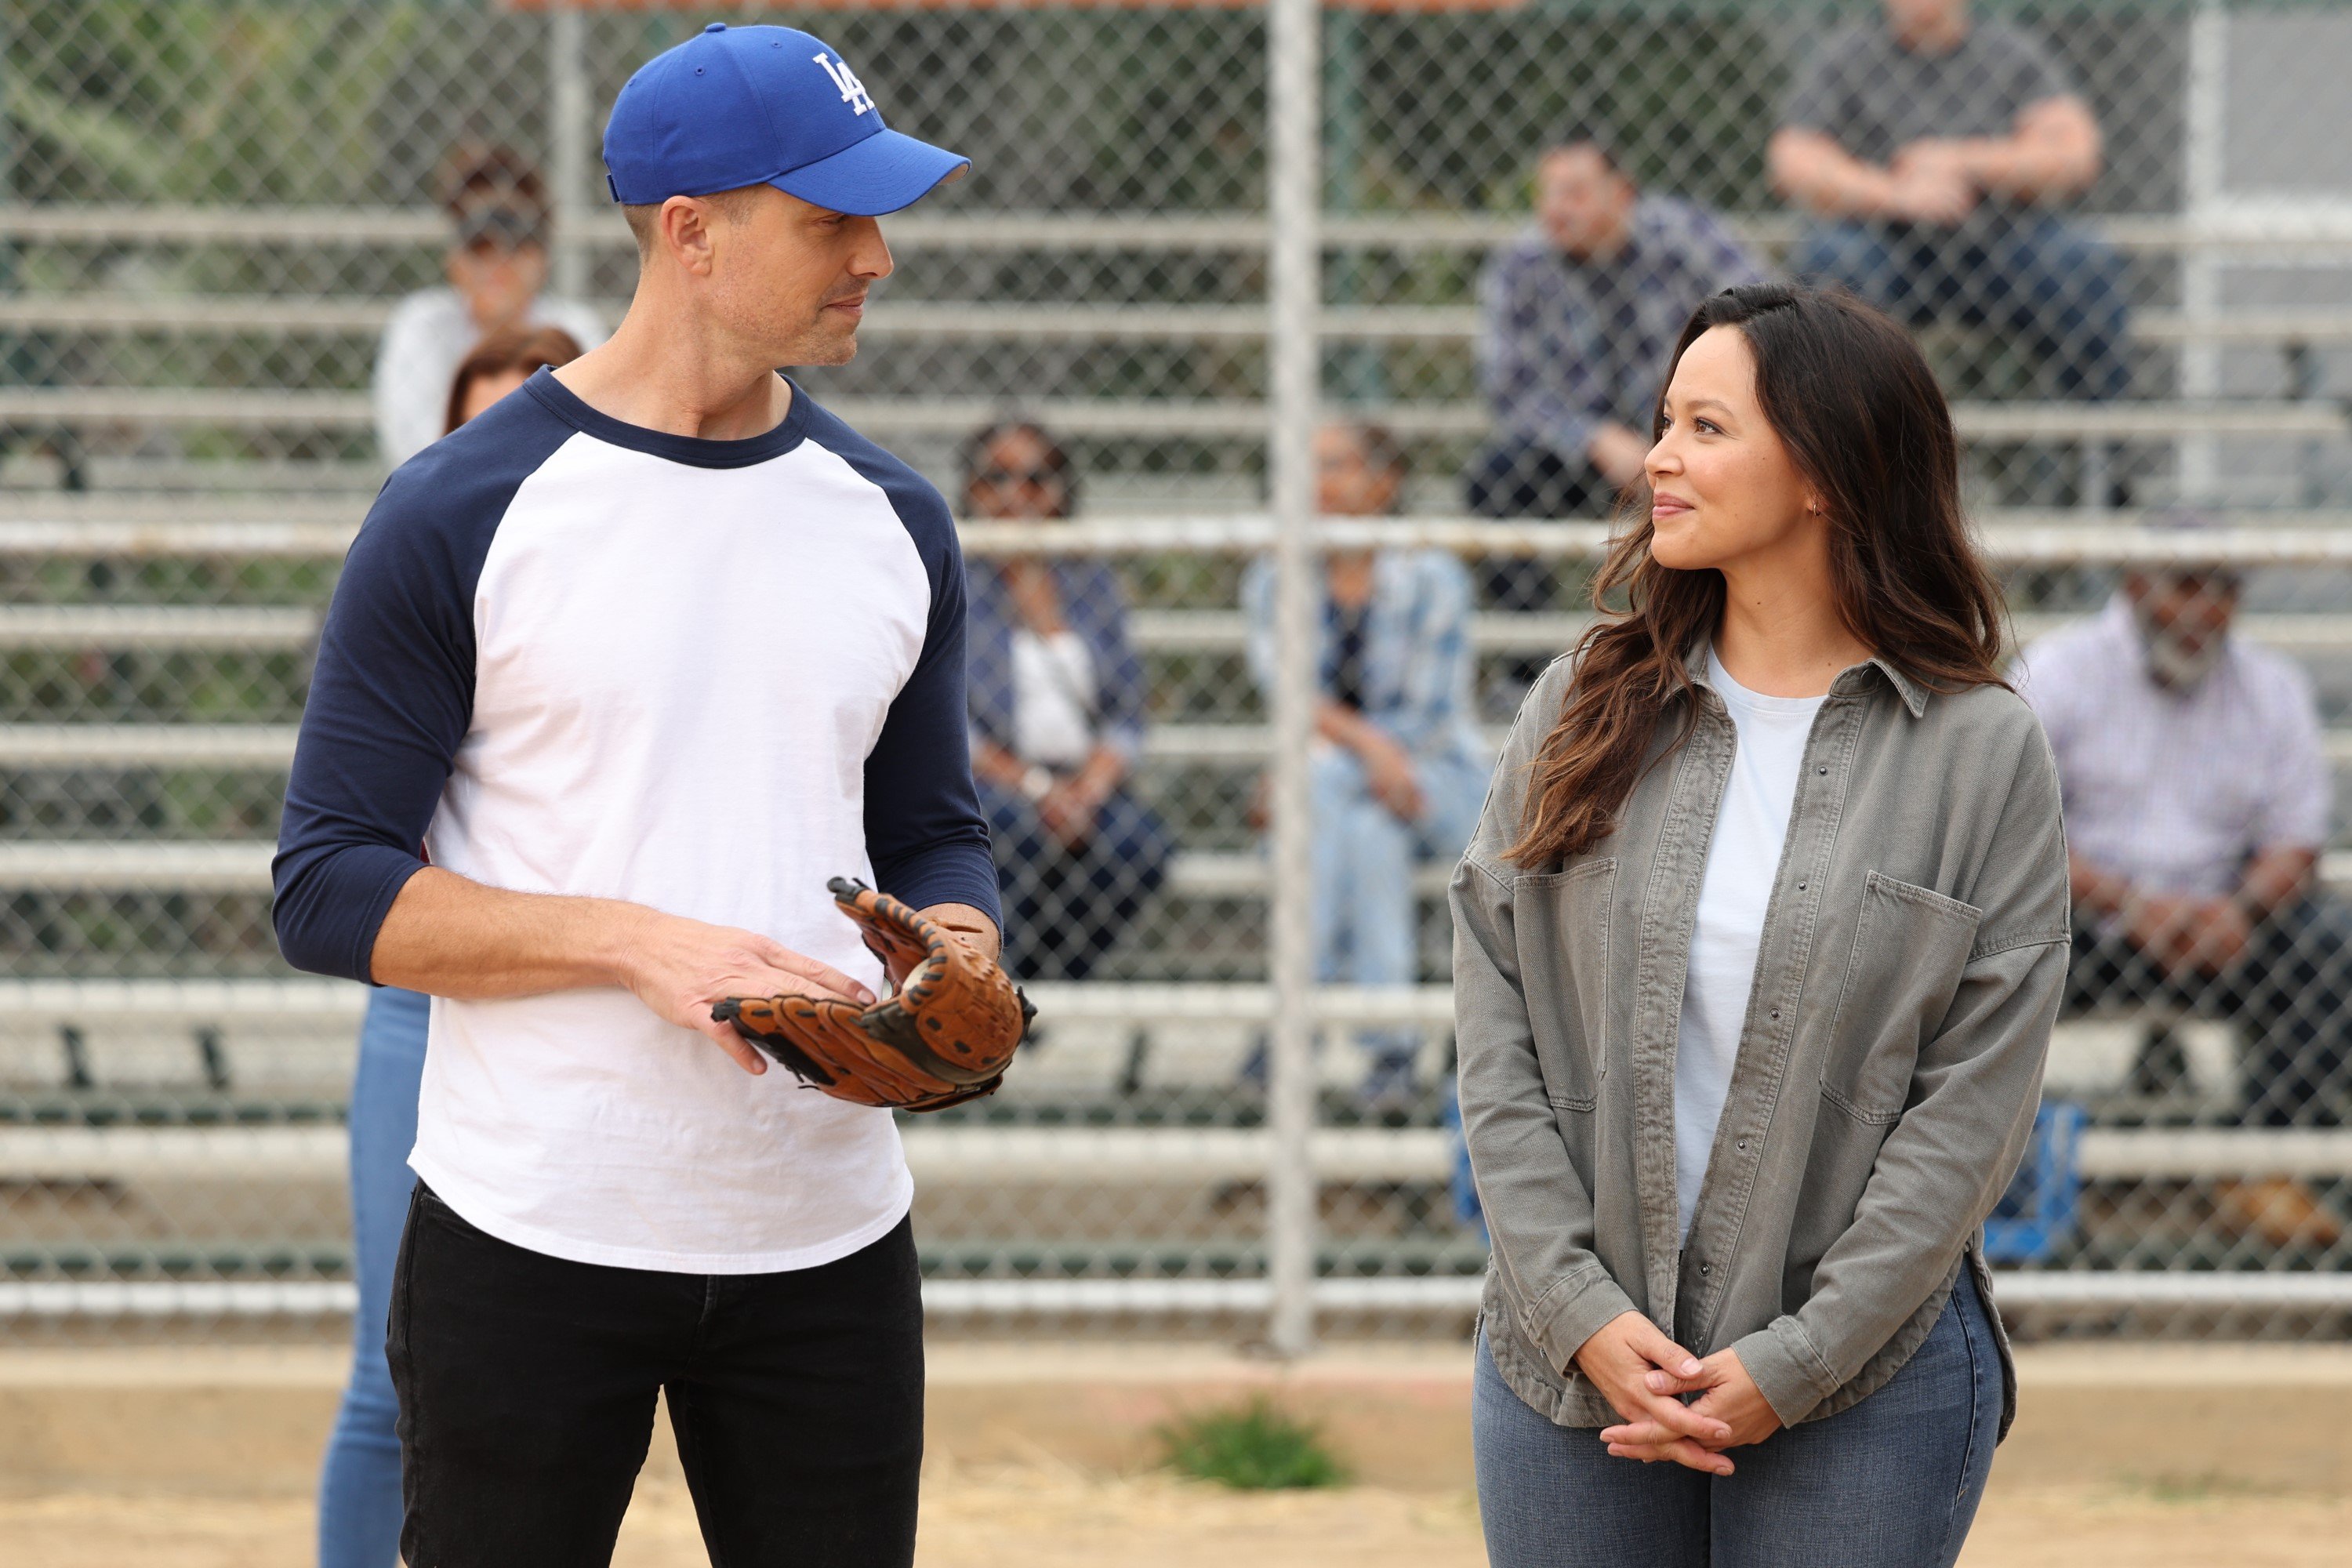 Eric Winter and Melissa O'Neil, in character as Tim Bradford and Lucy Chen in 'The Rookie' Season 5 Episode 11, share a scene on a baseball field. Tim wears a blue and white baseball shirt, black pants, and a blue LA Dodgers baseball hat. Lucy wears a gray button-up shirt over a white shirt and jeans.